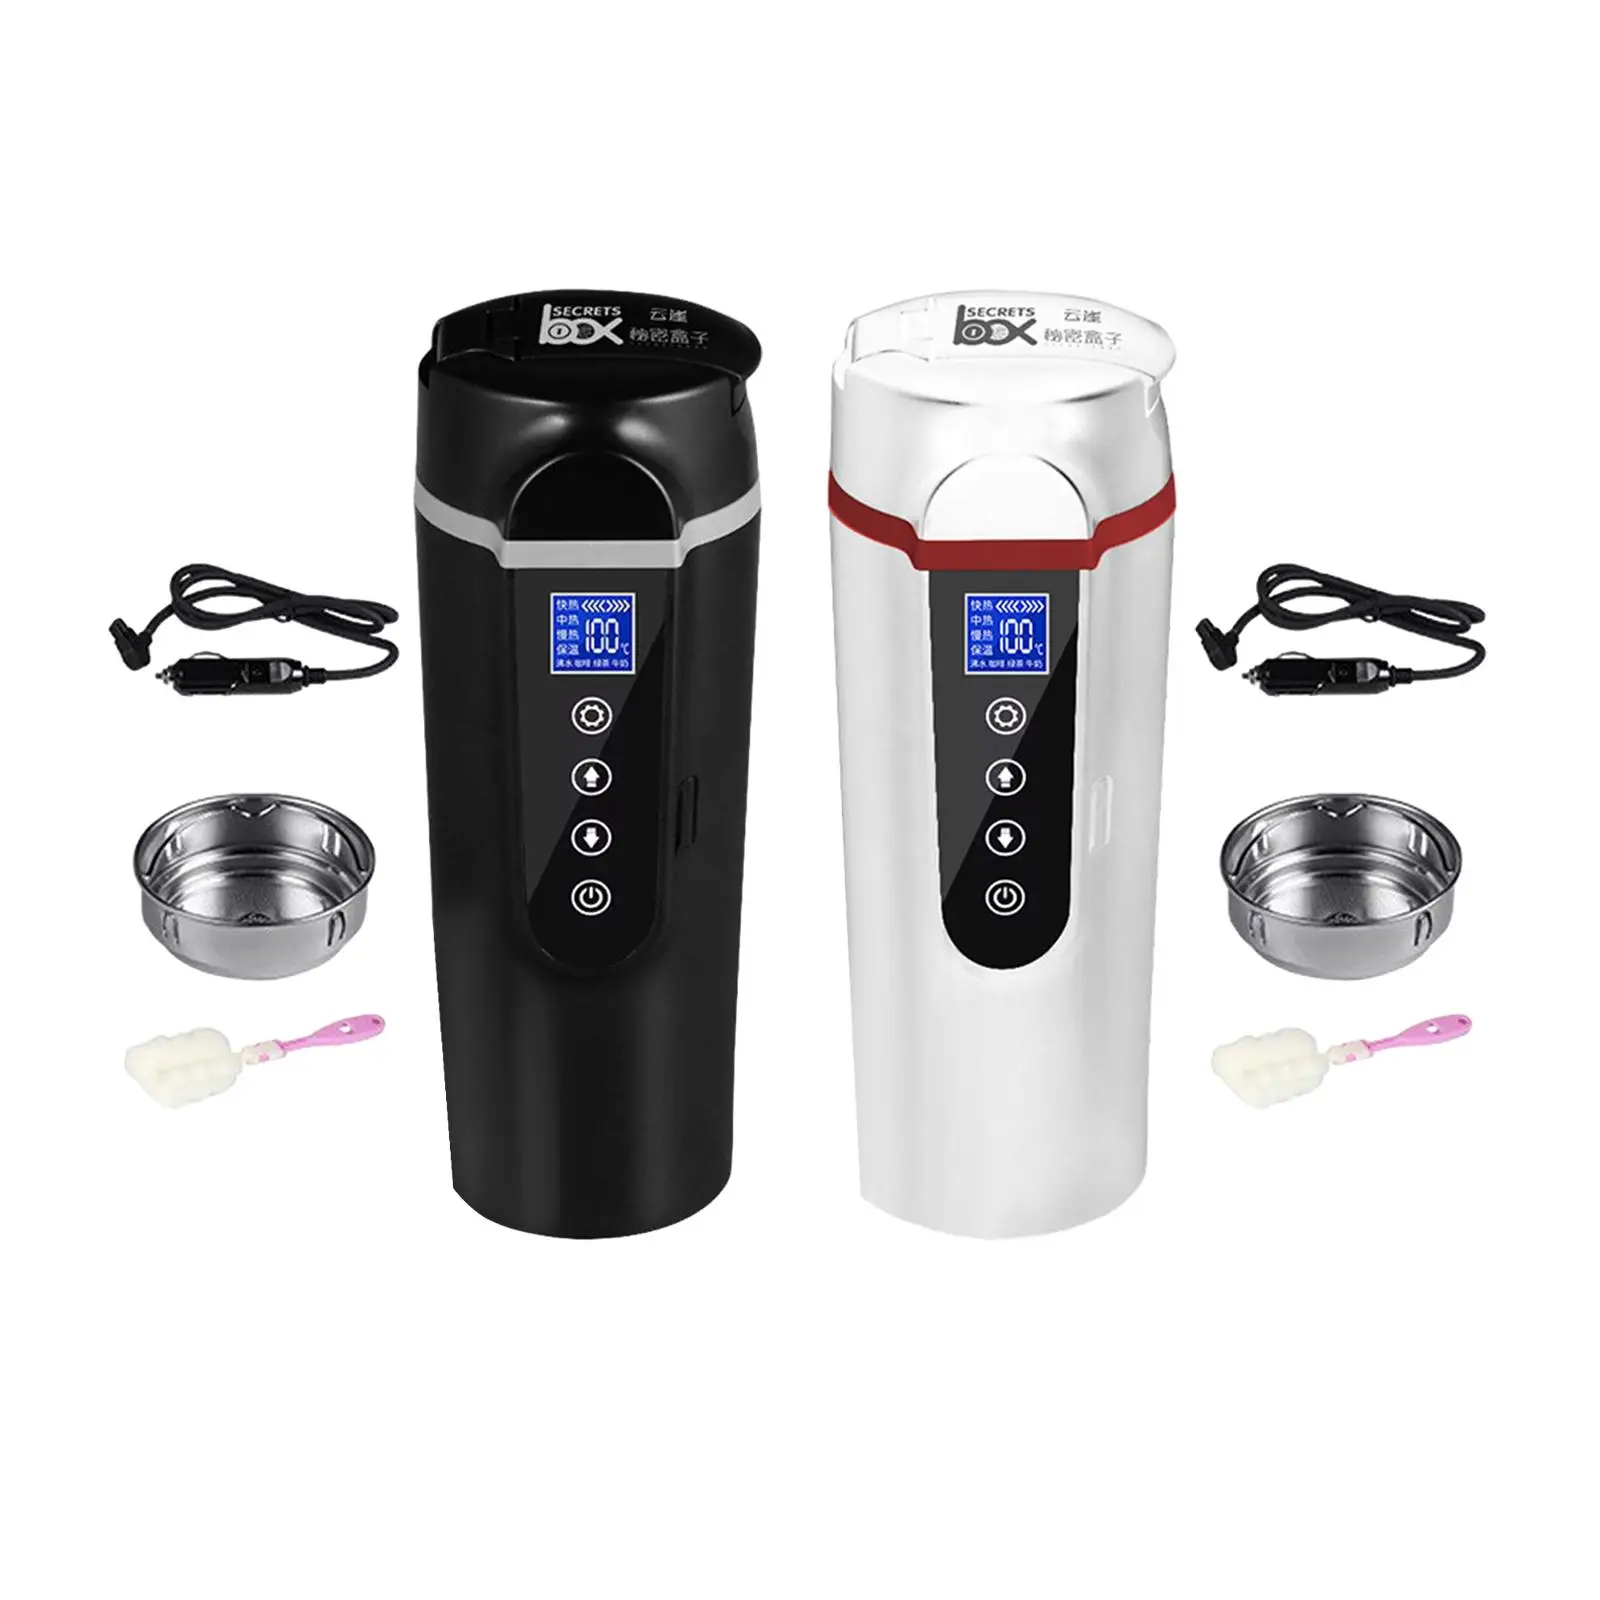 Car Heating Cup Smart Electric Tea Kettle for Camping Vehicles Airplane